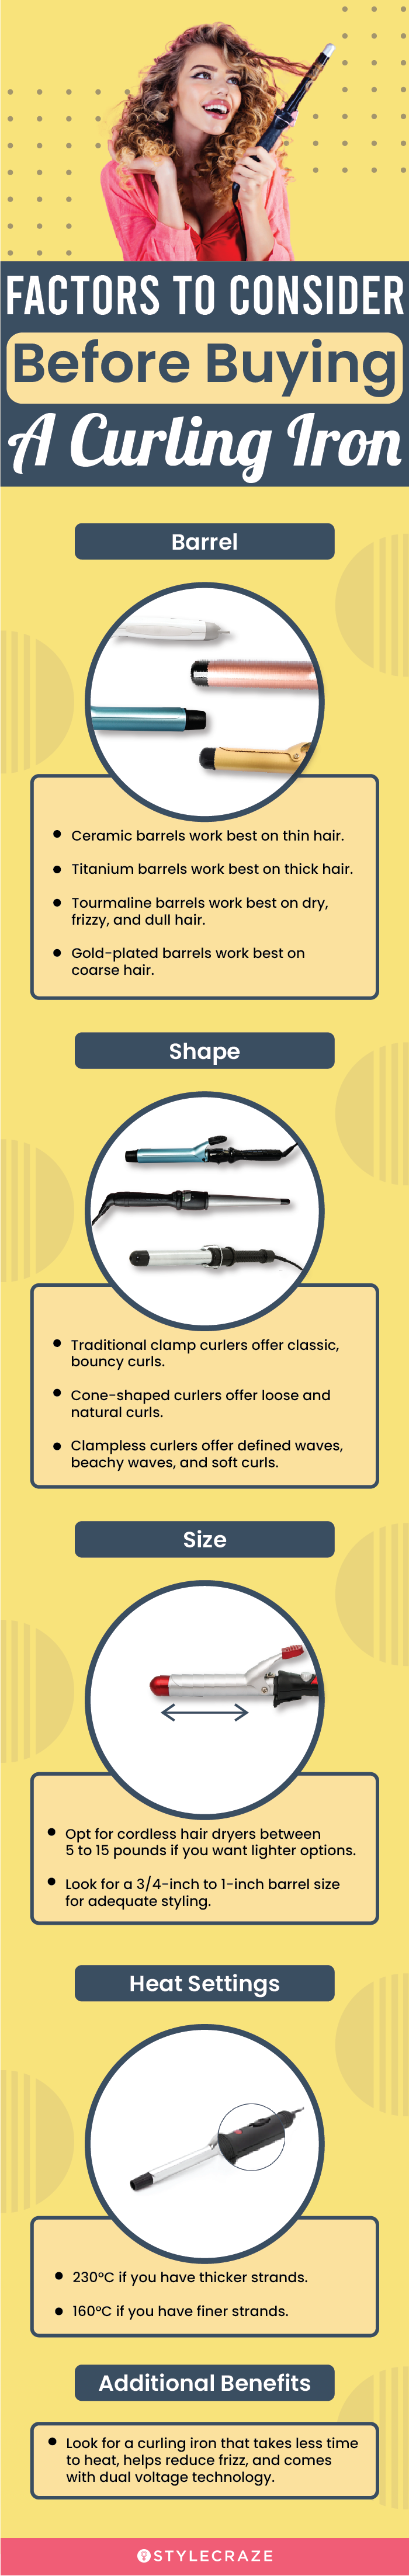 Factors To Consider Before Buying Curling Iron